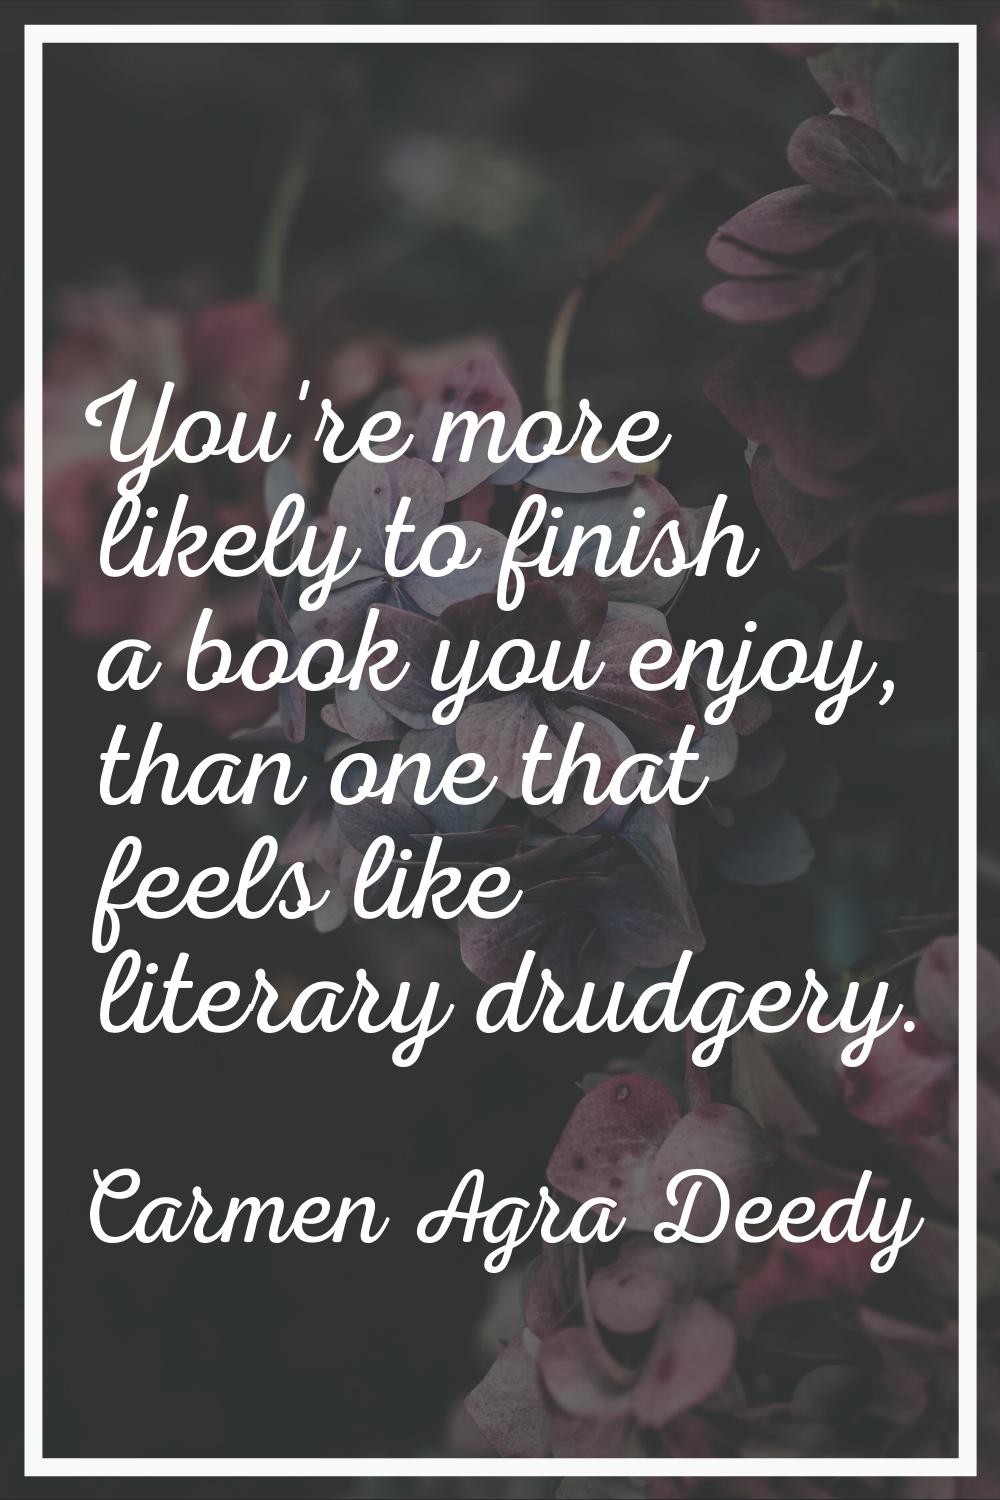 You're more likely to finish a book you enjoy, than one that feels like literary drudgery.